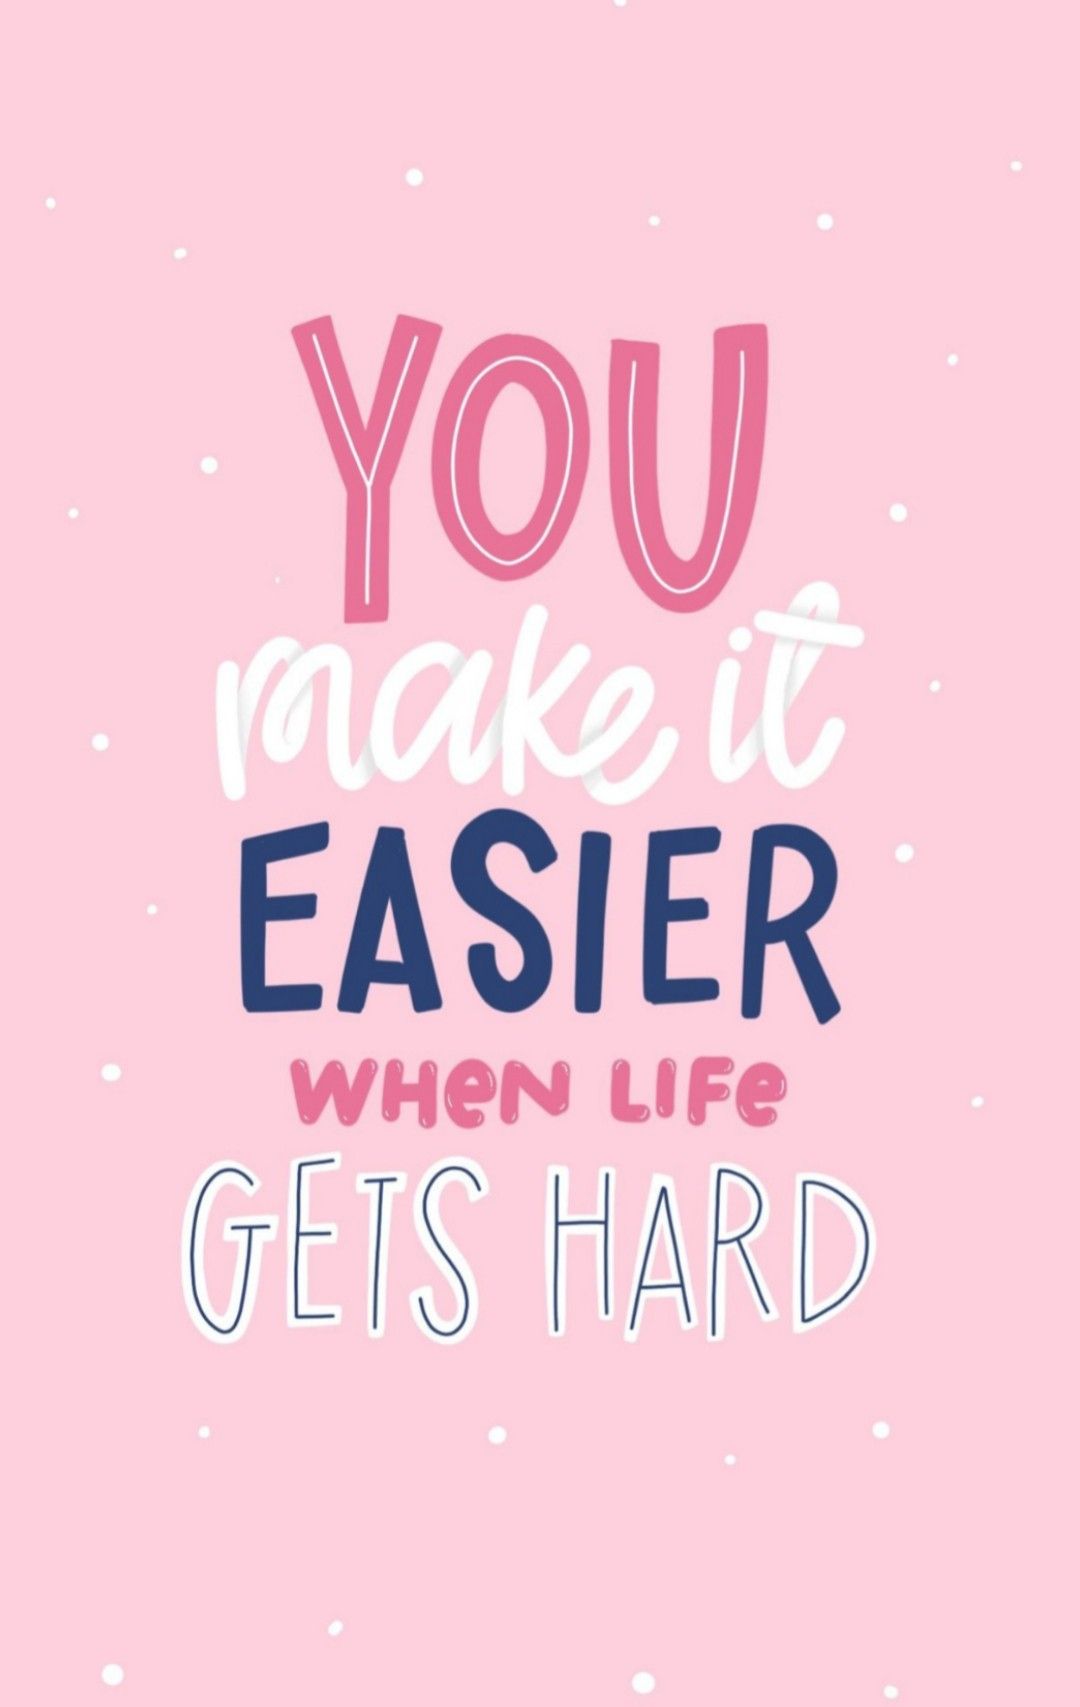 HD Quote Wallpaper Quotes Wallpaper you make it easier when life gets hard. Words wallpaper, Wallpaper quotes, Inspirational quotes wallpaper